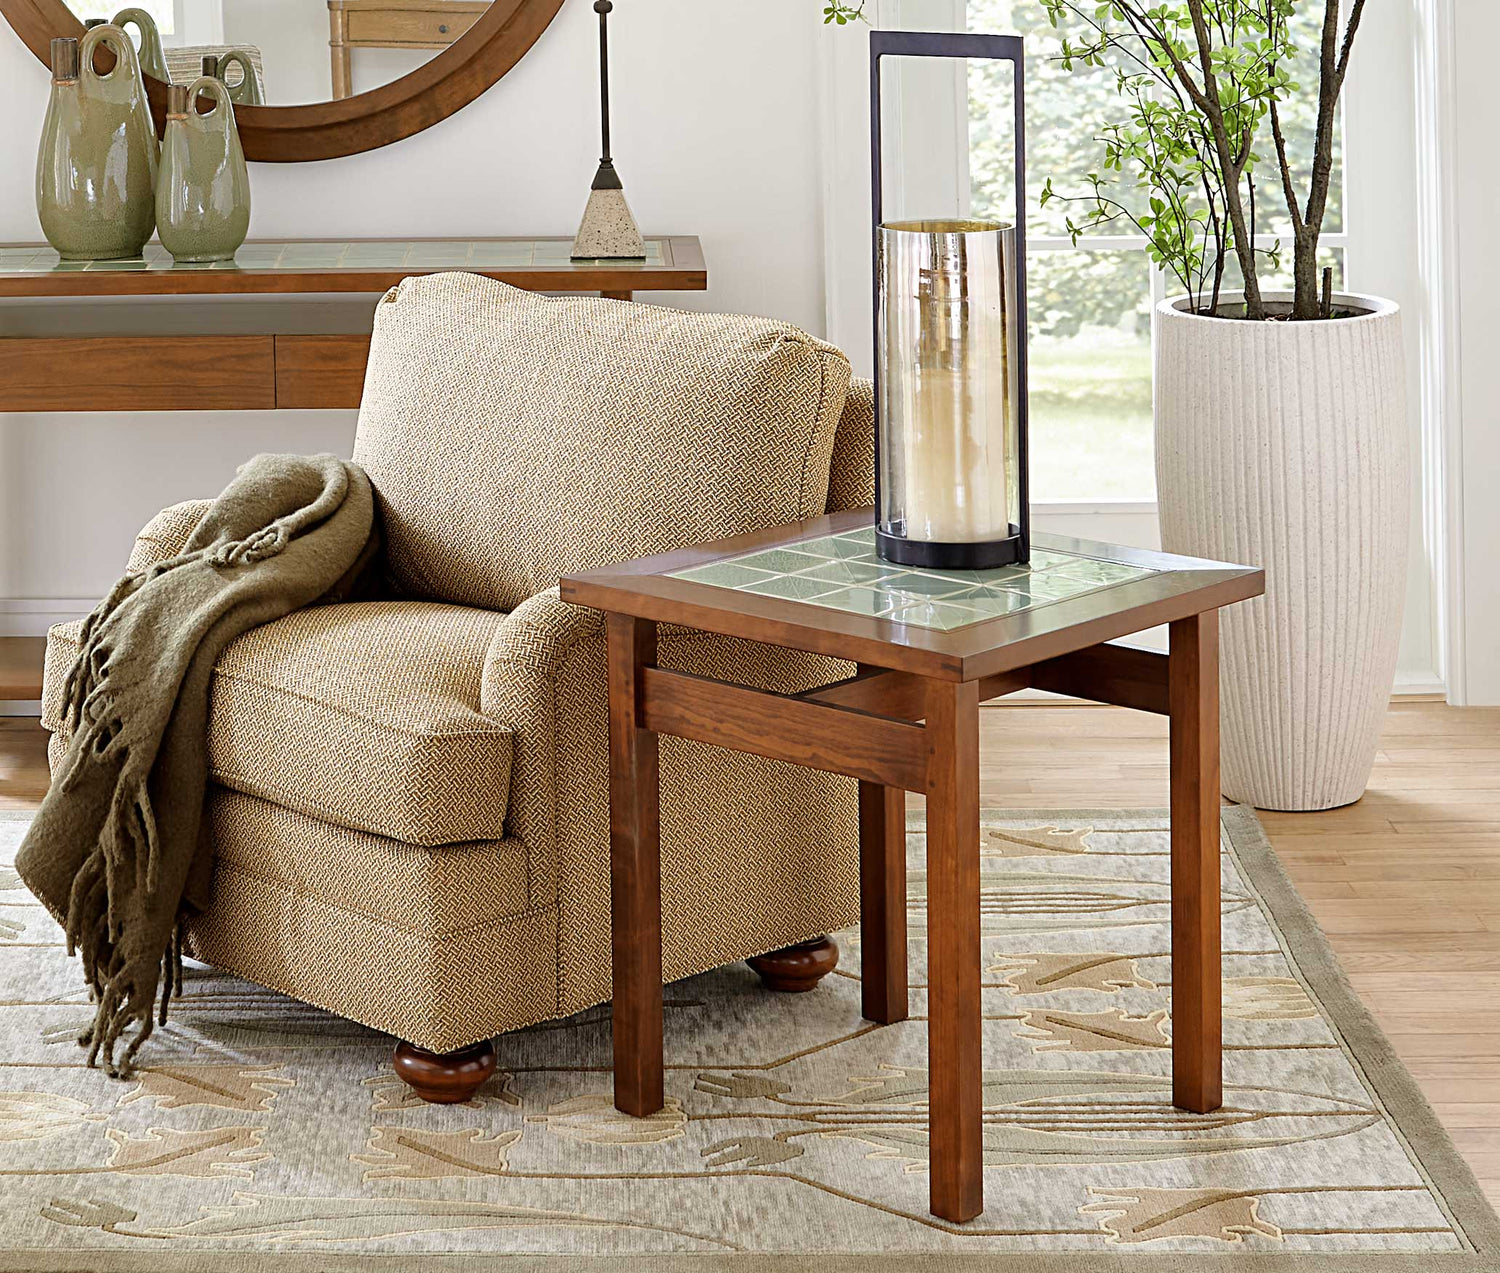 A Mission Tile-Top End Table sits next to a tan fabric accent chair that has a dark green throw blanket over the arm. There is a glass vase on top of the end table